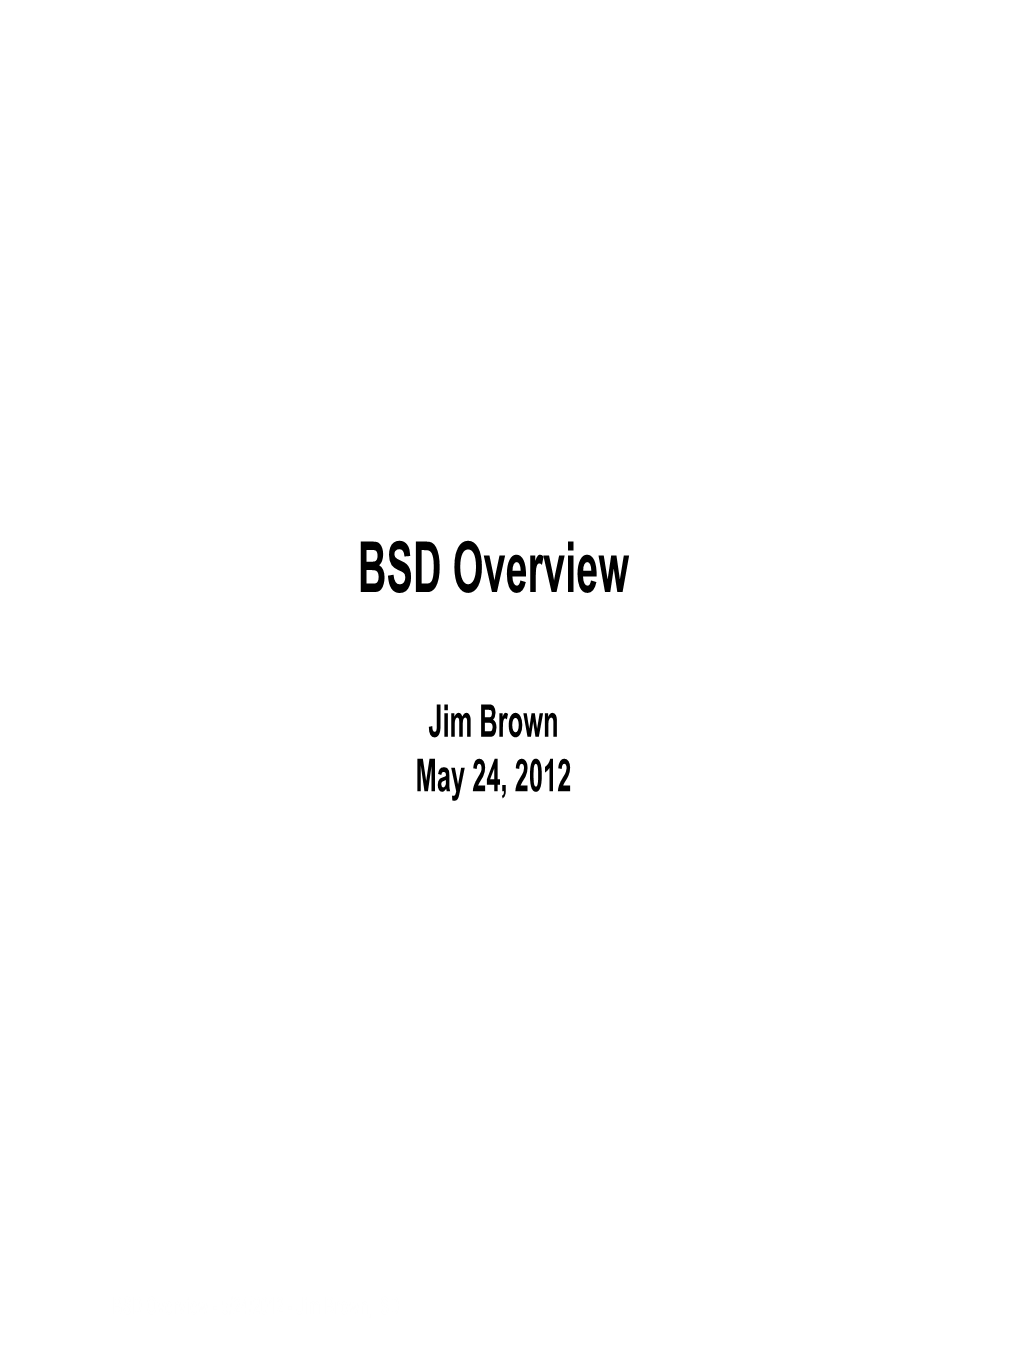 BSD Projects IV – BSD Certification • Main Features • Community • Future Directions a (Very) Brief History of BSD